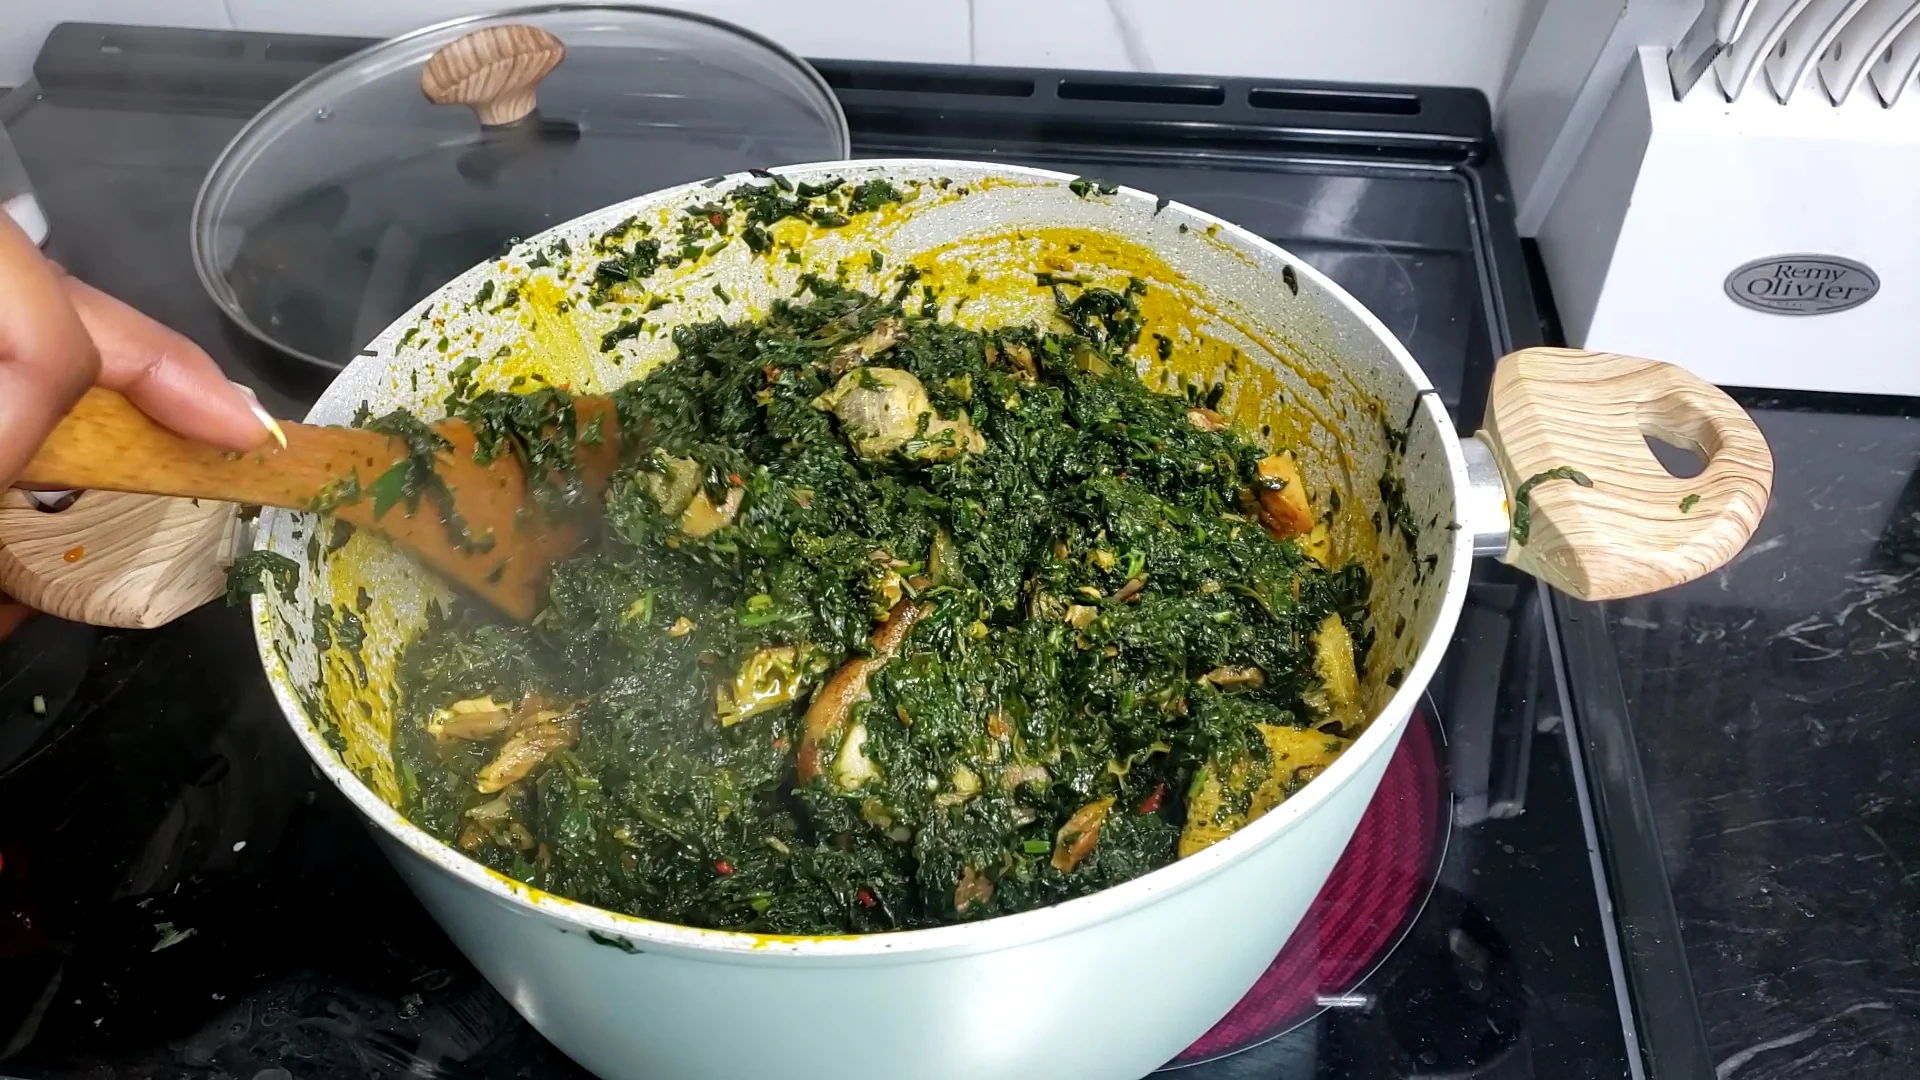 Tips on How to Cook Vegetable Soup Without Waterleaf